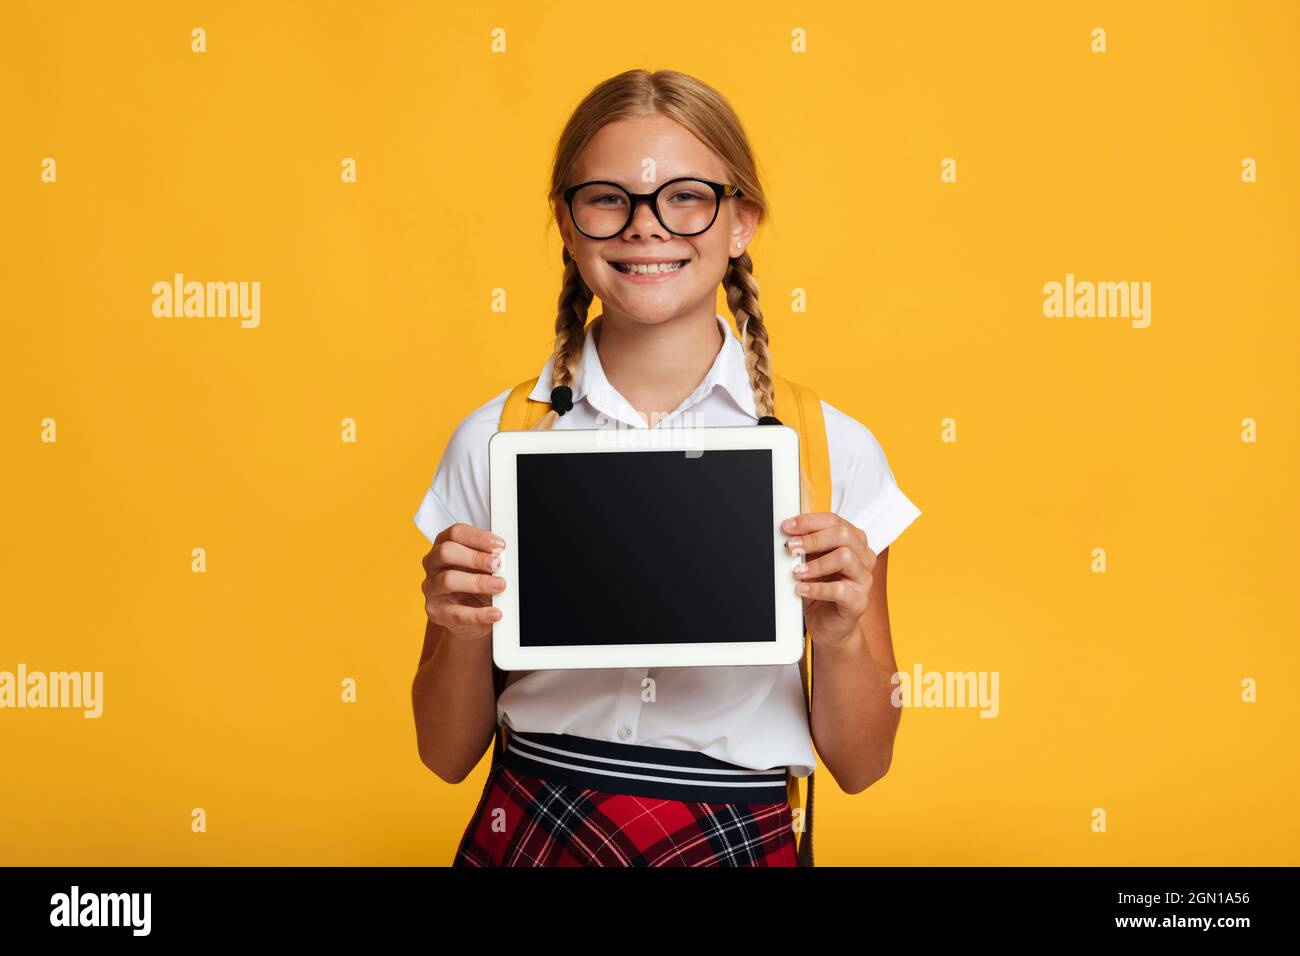 Glad adolescence blonde schoolgirl in glasses shows tablet with empty screen Stock Photo